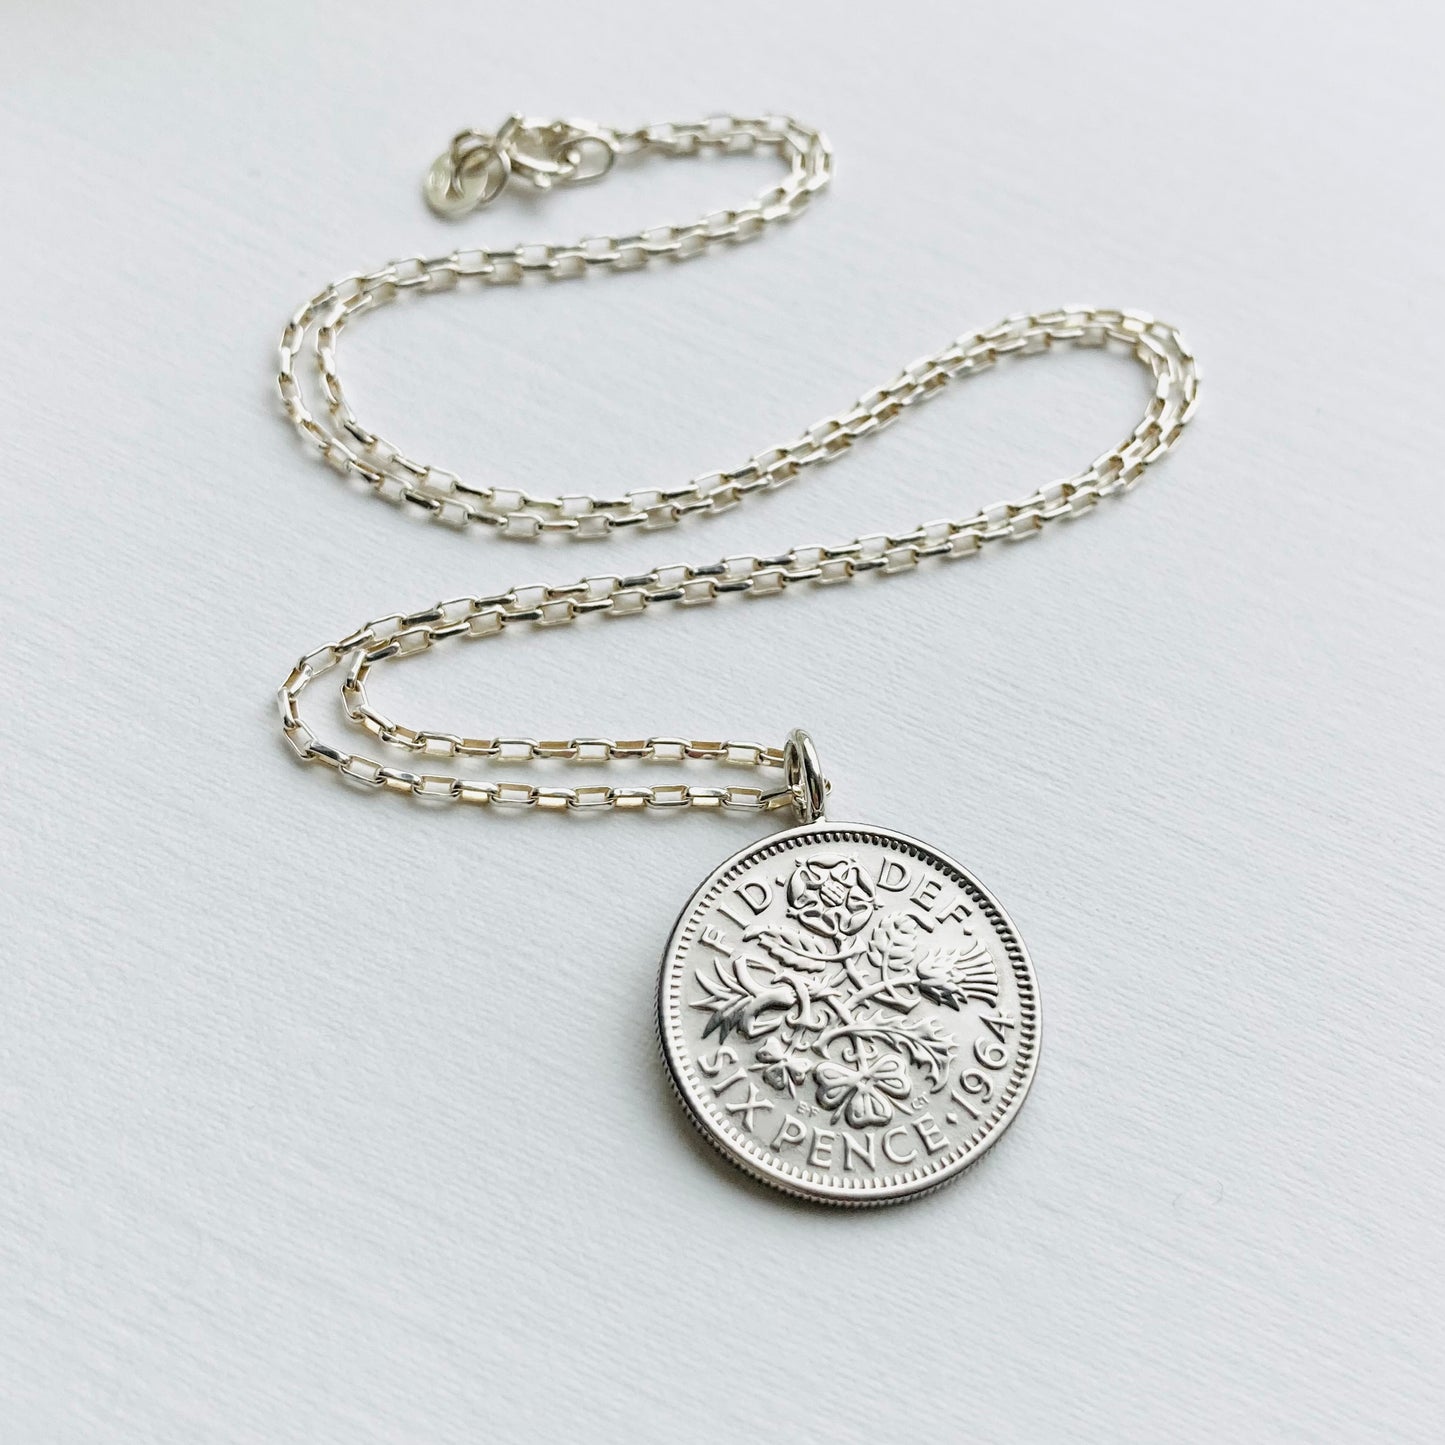 1964 Sixpence Necklace - Oblong Chain - 60th Birthday